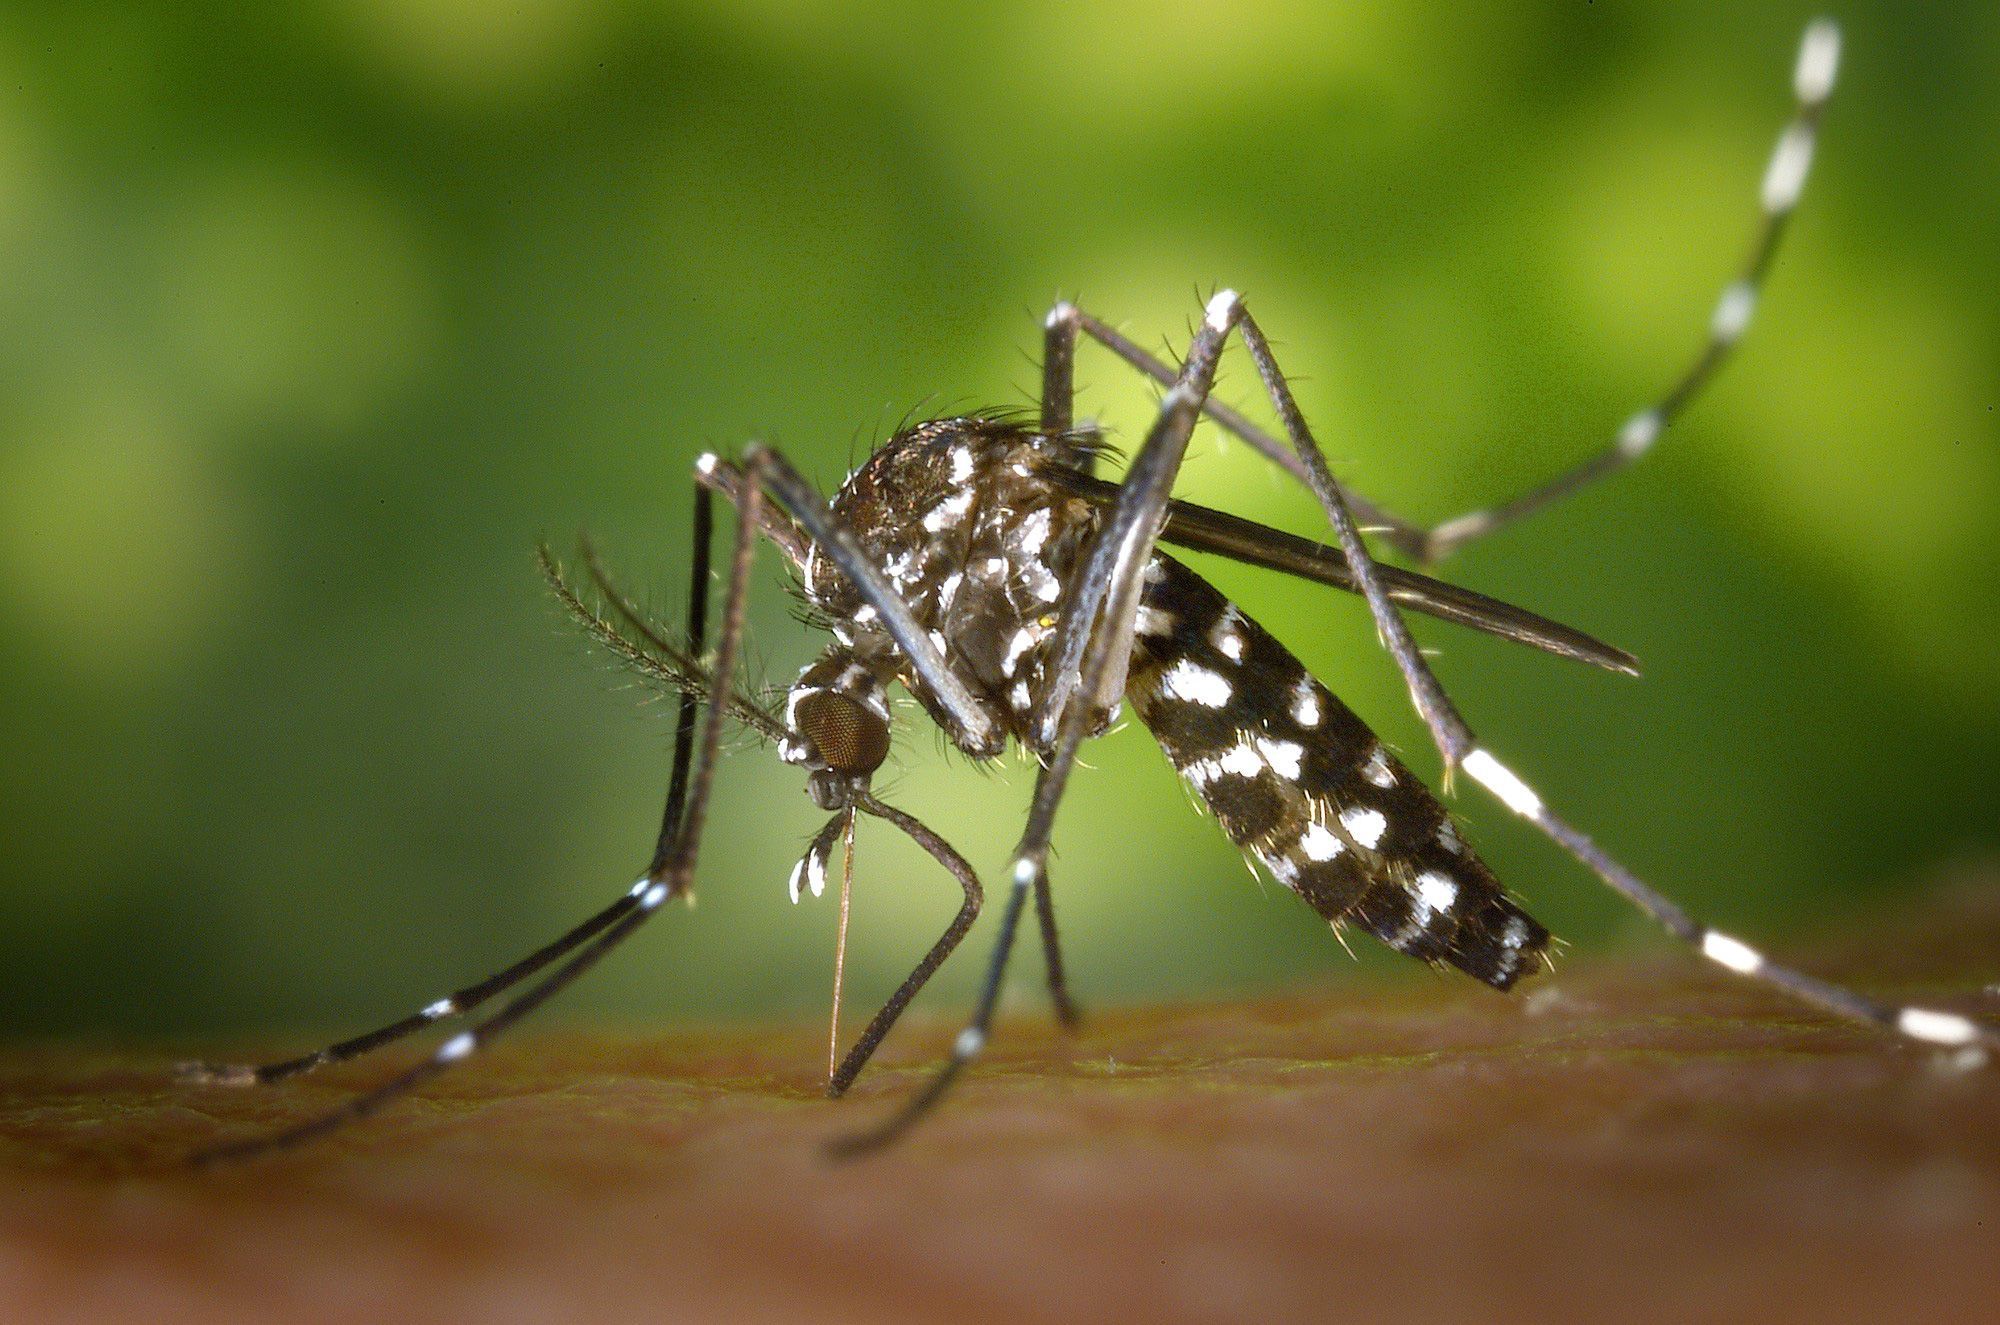 the-images-of-mosquitoes-causing-dengue-fever-13